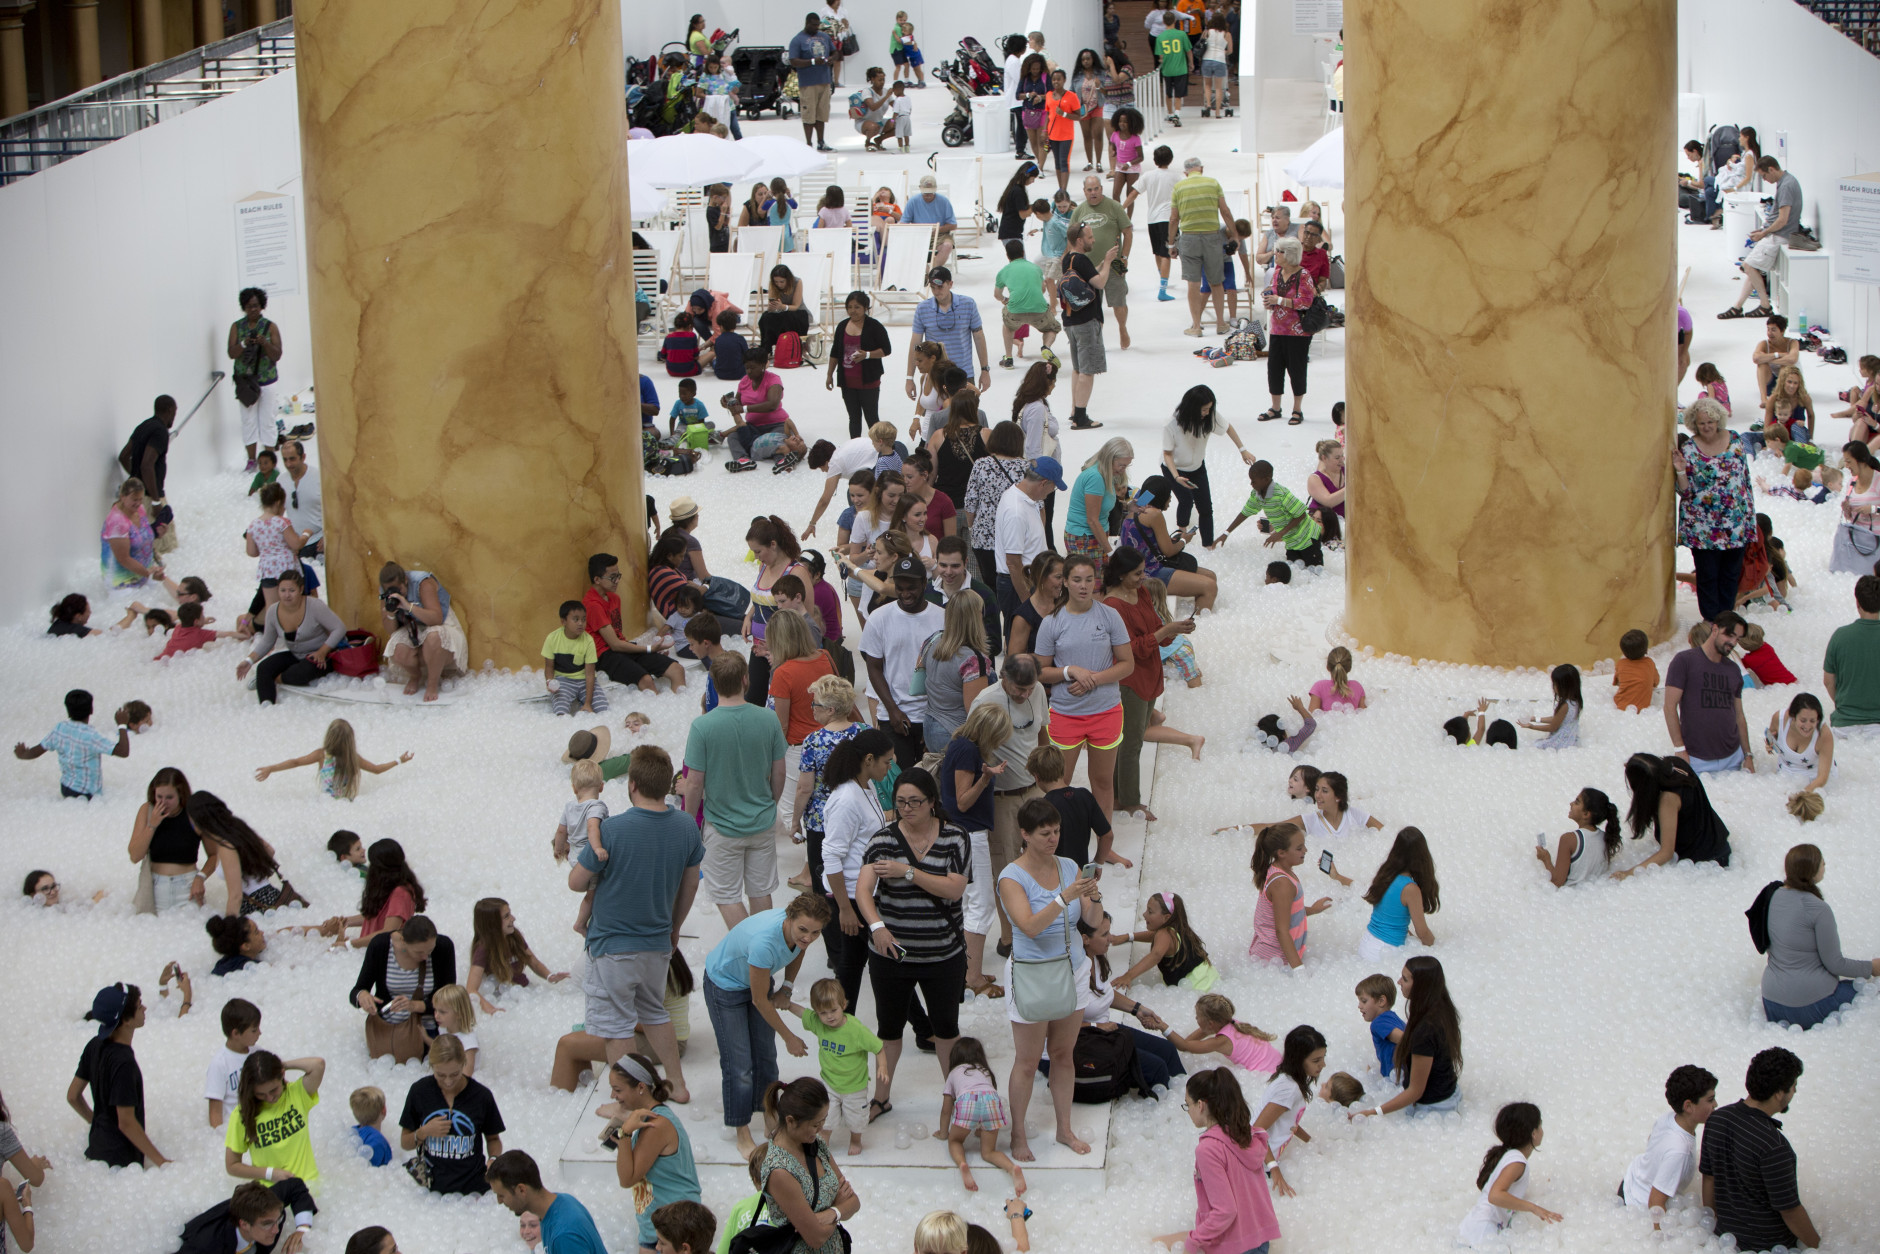 Children and adults play at "The Beach", an interactive architectural installation inside the National Building Museum in Washington, Wednesday, July 29, 2015. The Beach, which spans the length of the museum's Great Hall, was created in partnership with Snarkitecture, and covers 10,000 square feet and includes an ocean of nearly one million recyclable translucent plastic balls.   (AP Photo/Carolyn Kaster)